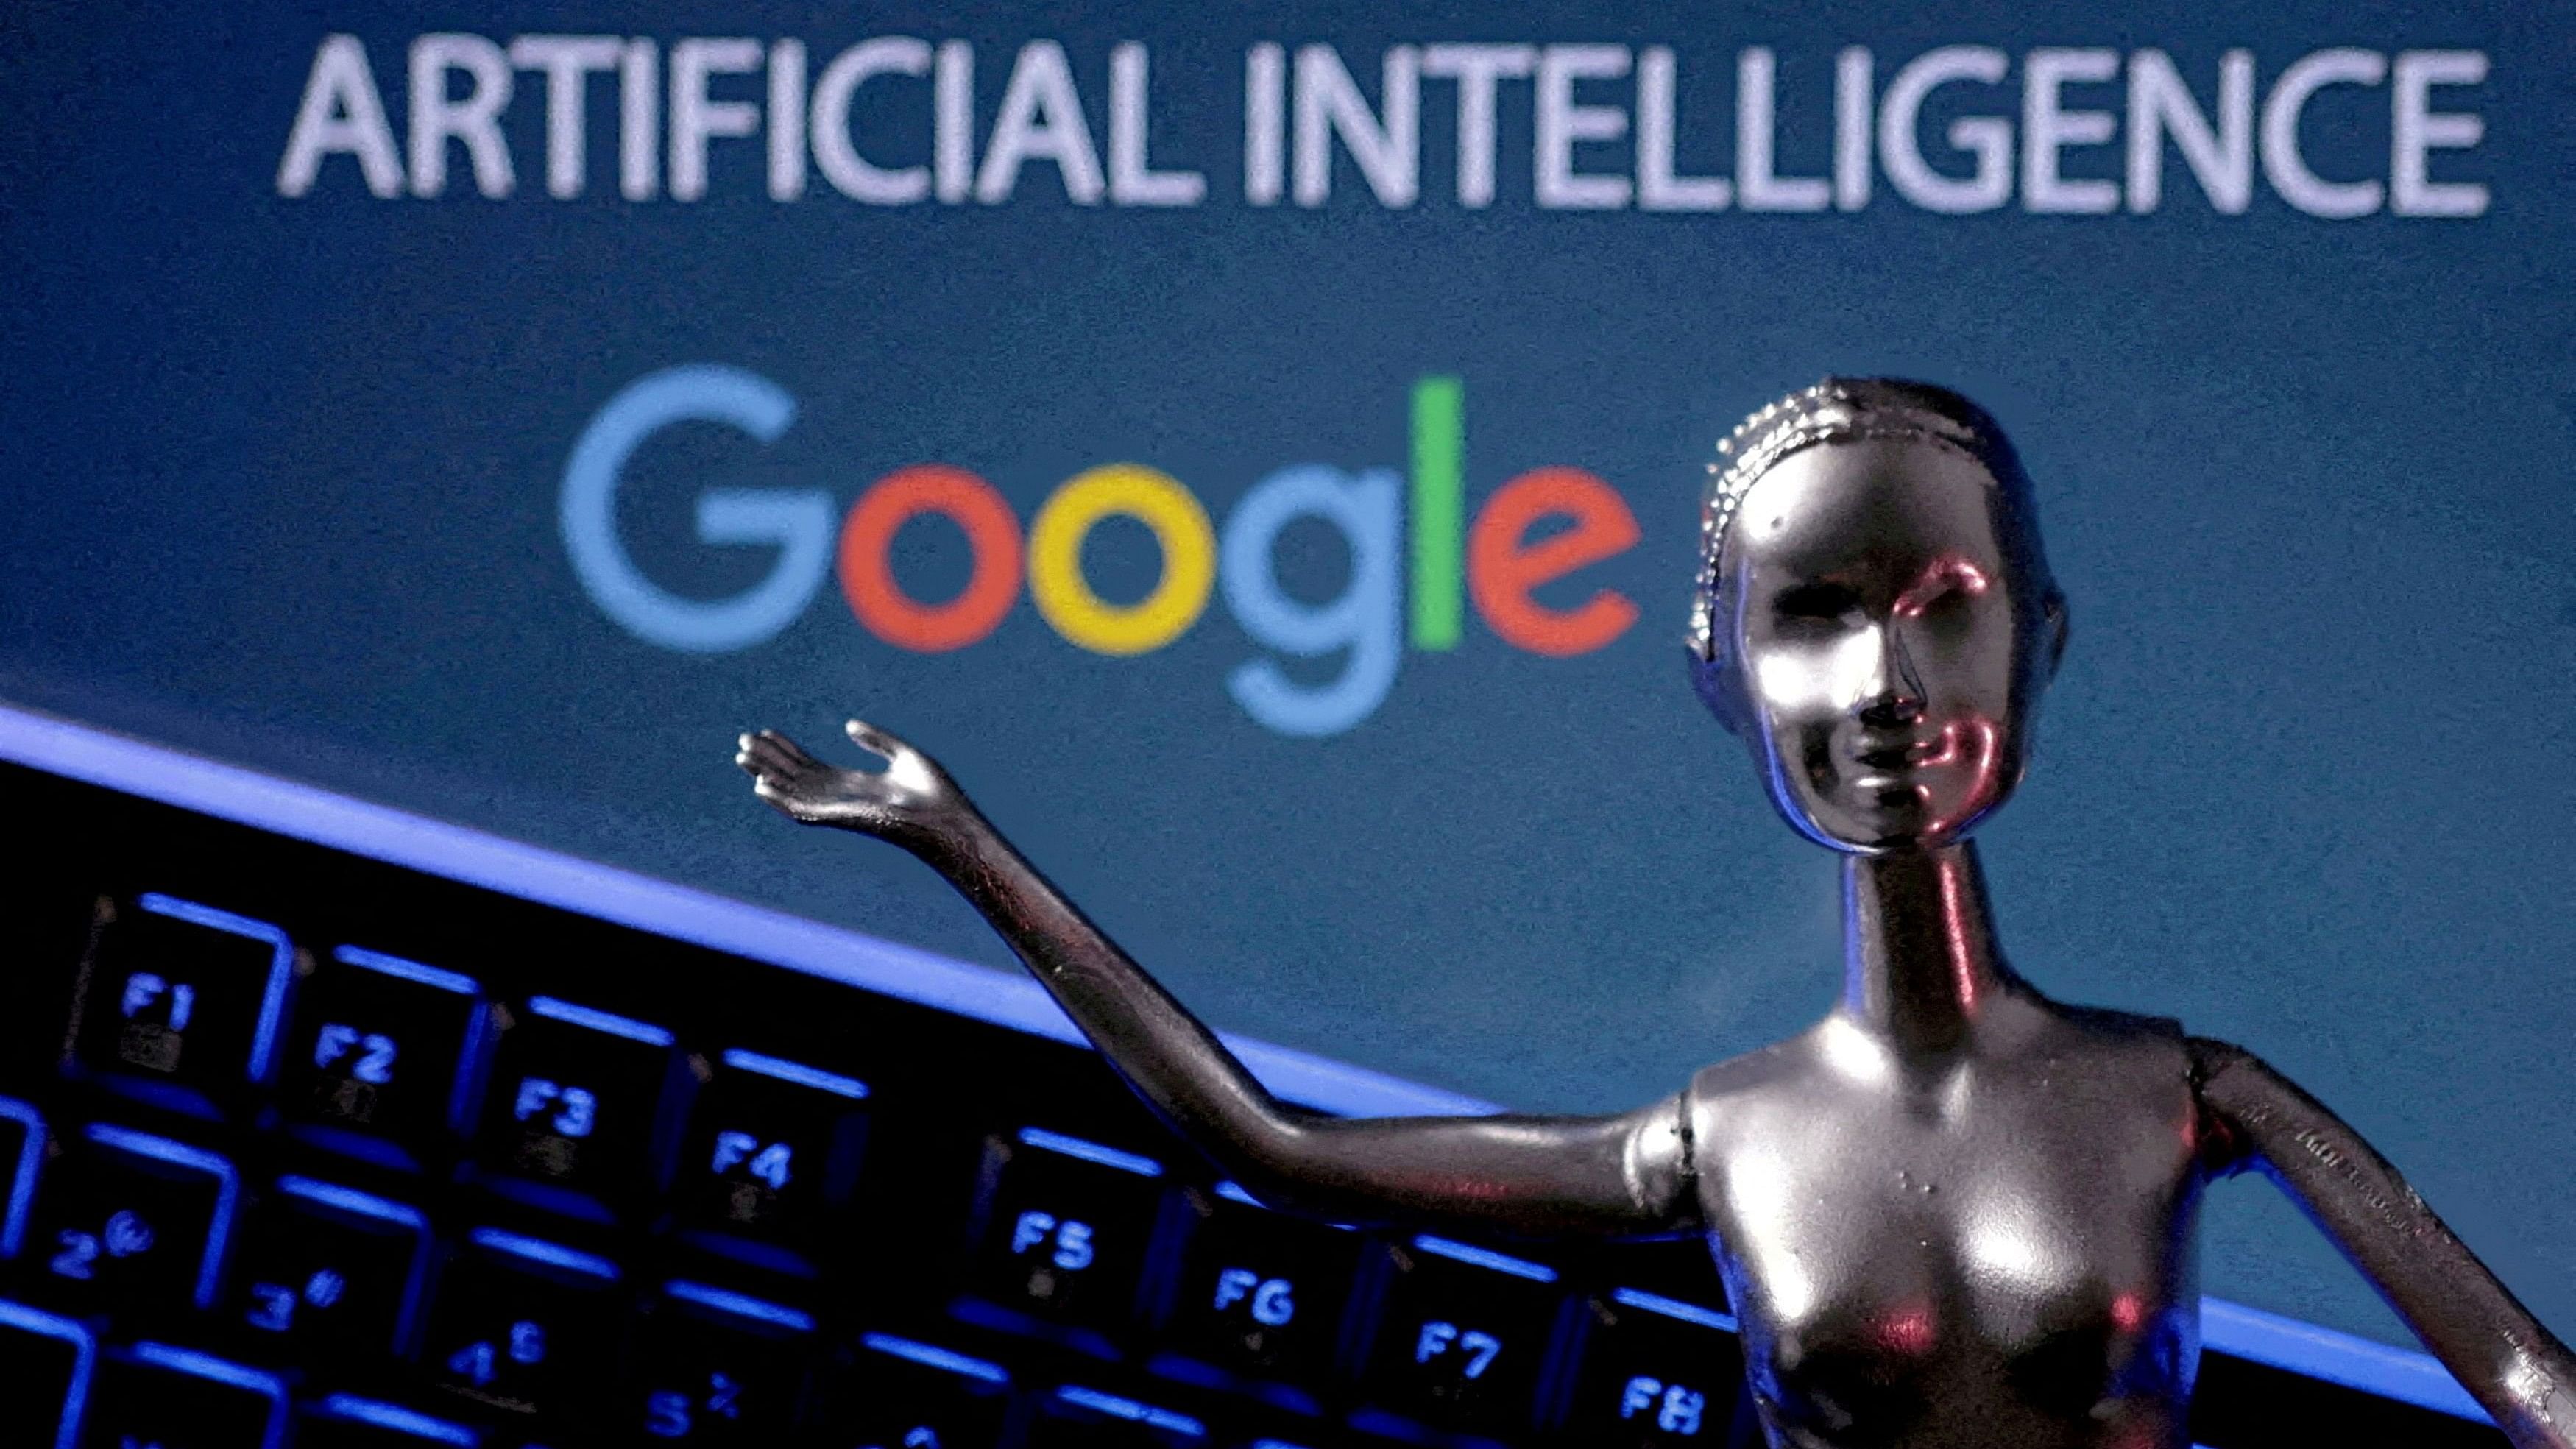 <div class="paragraphs"><p>Google logo and AI Artificial Intelligence words are seen in this illustration.</p></div>